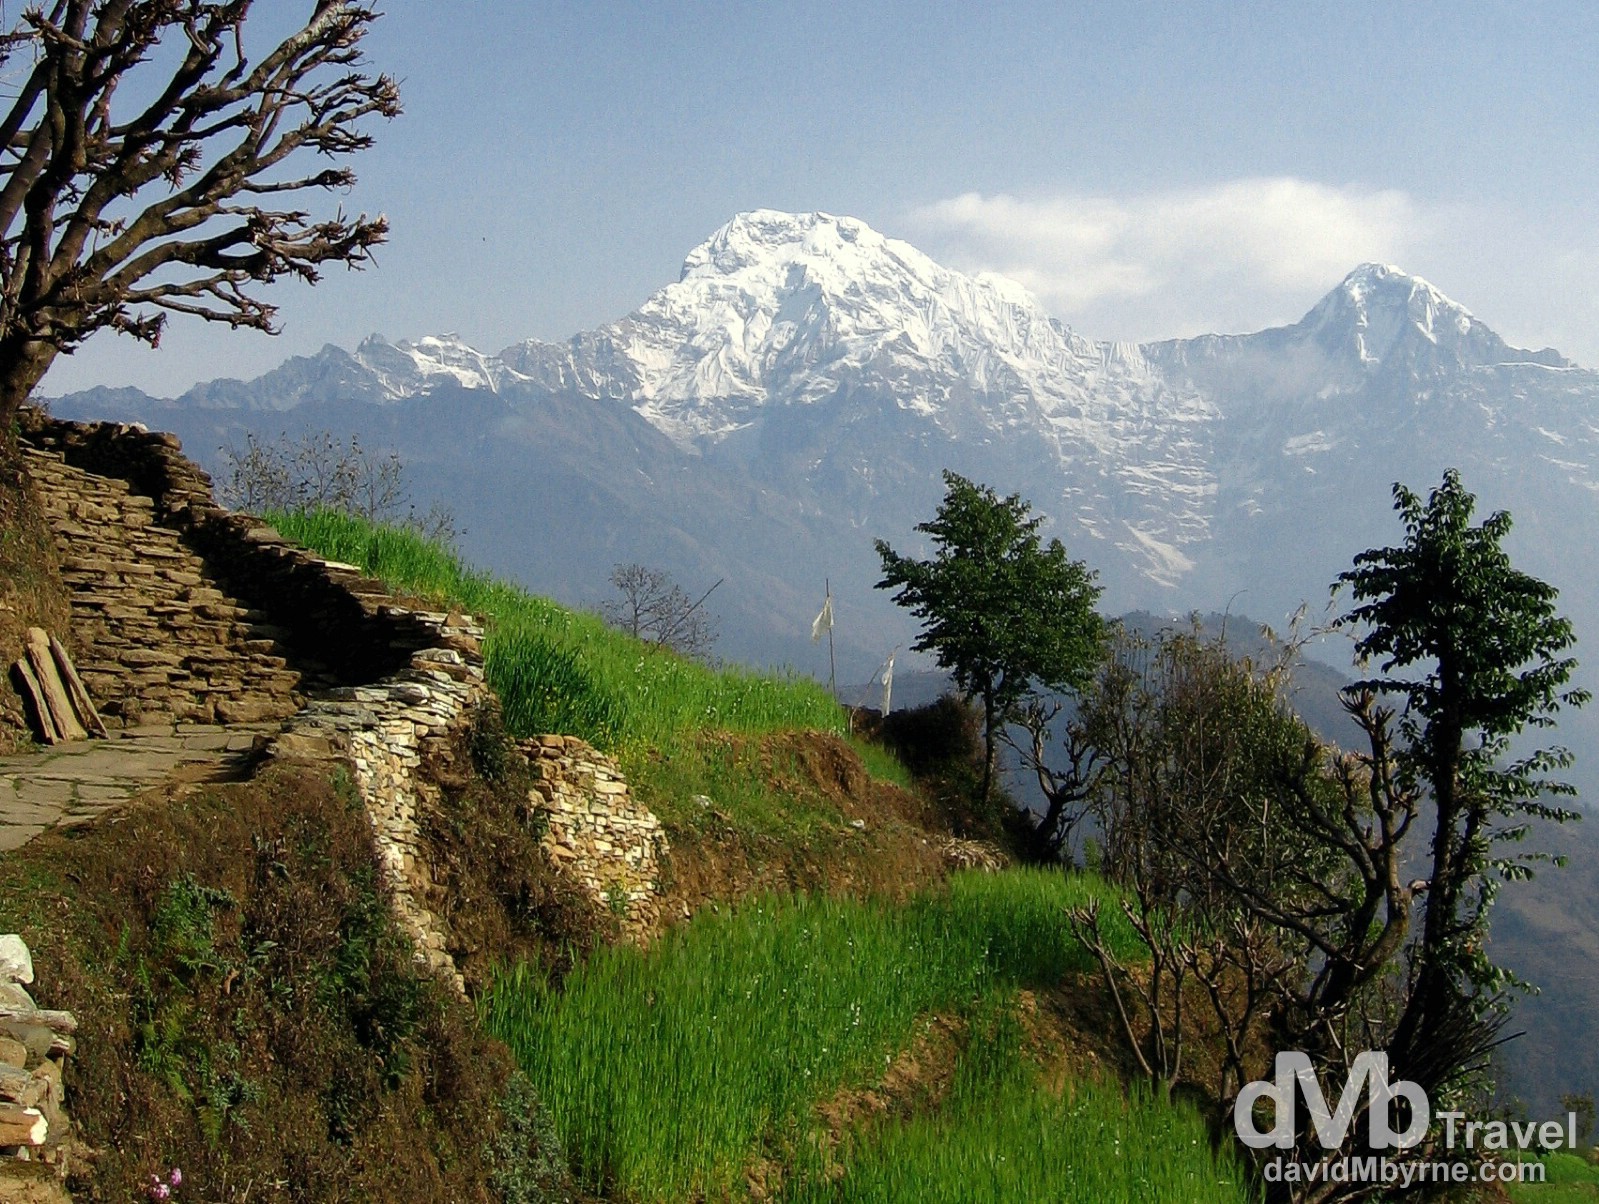 The peak of Annapurna South (24,000ft, 7219m) from the village of Ghandruk in the Annapurna Conservation Area, Nepal. March 11th 2008.